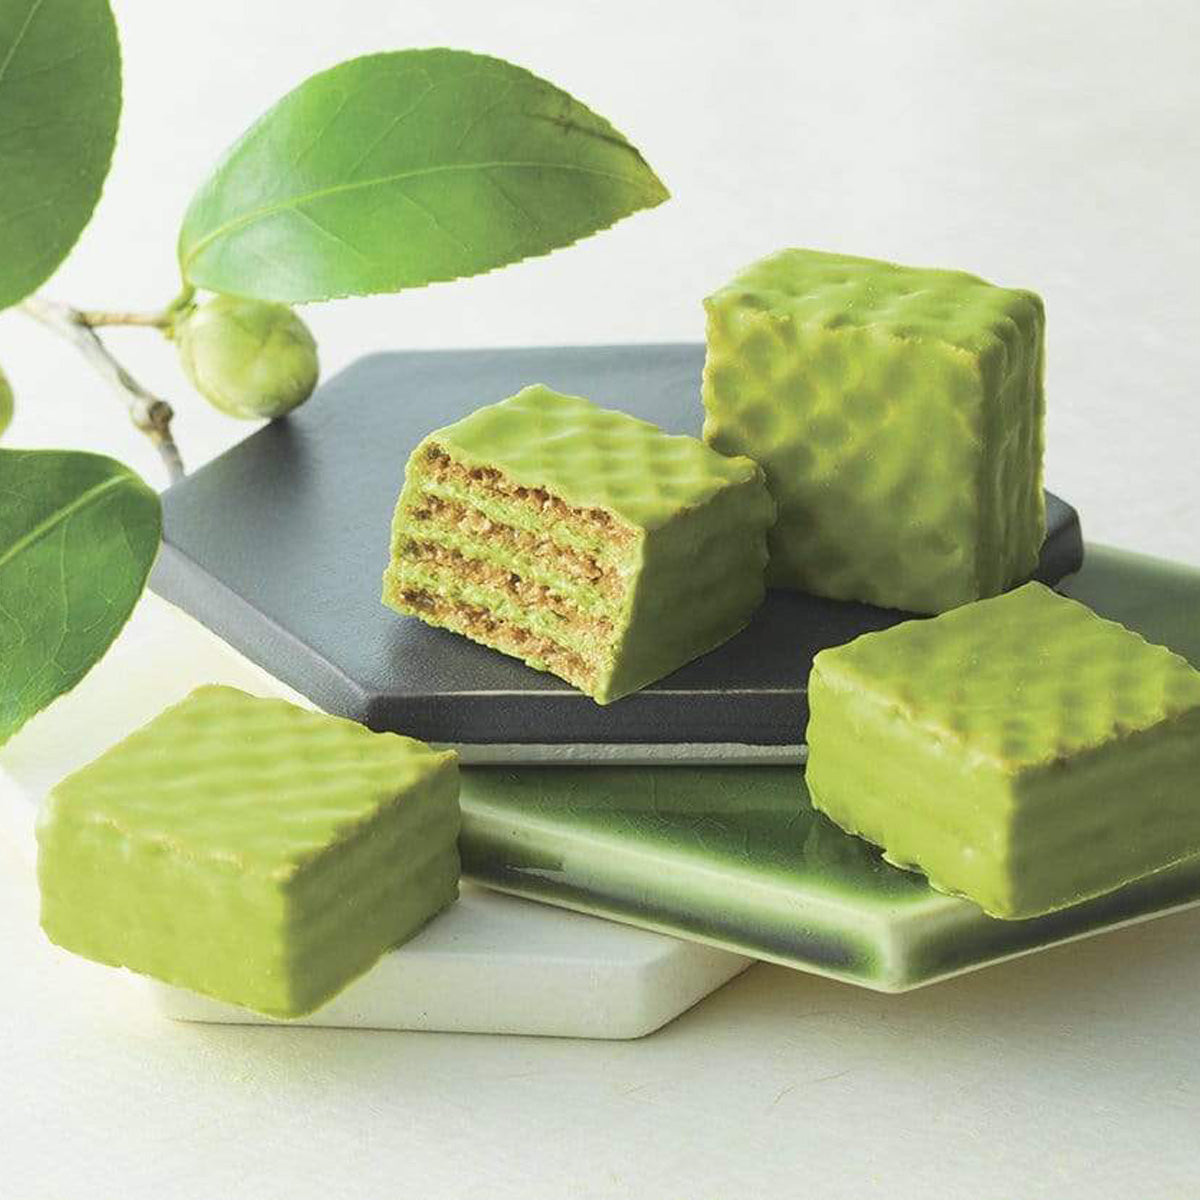 ROYCE' Chocolate - Chocolate Wafers "Matcha" - Image shows green chocolate wafers on  white, green, and black plates. Accents include green leaves. Background is in white.